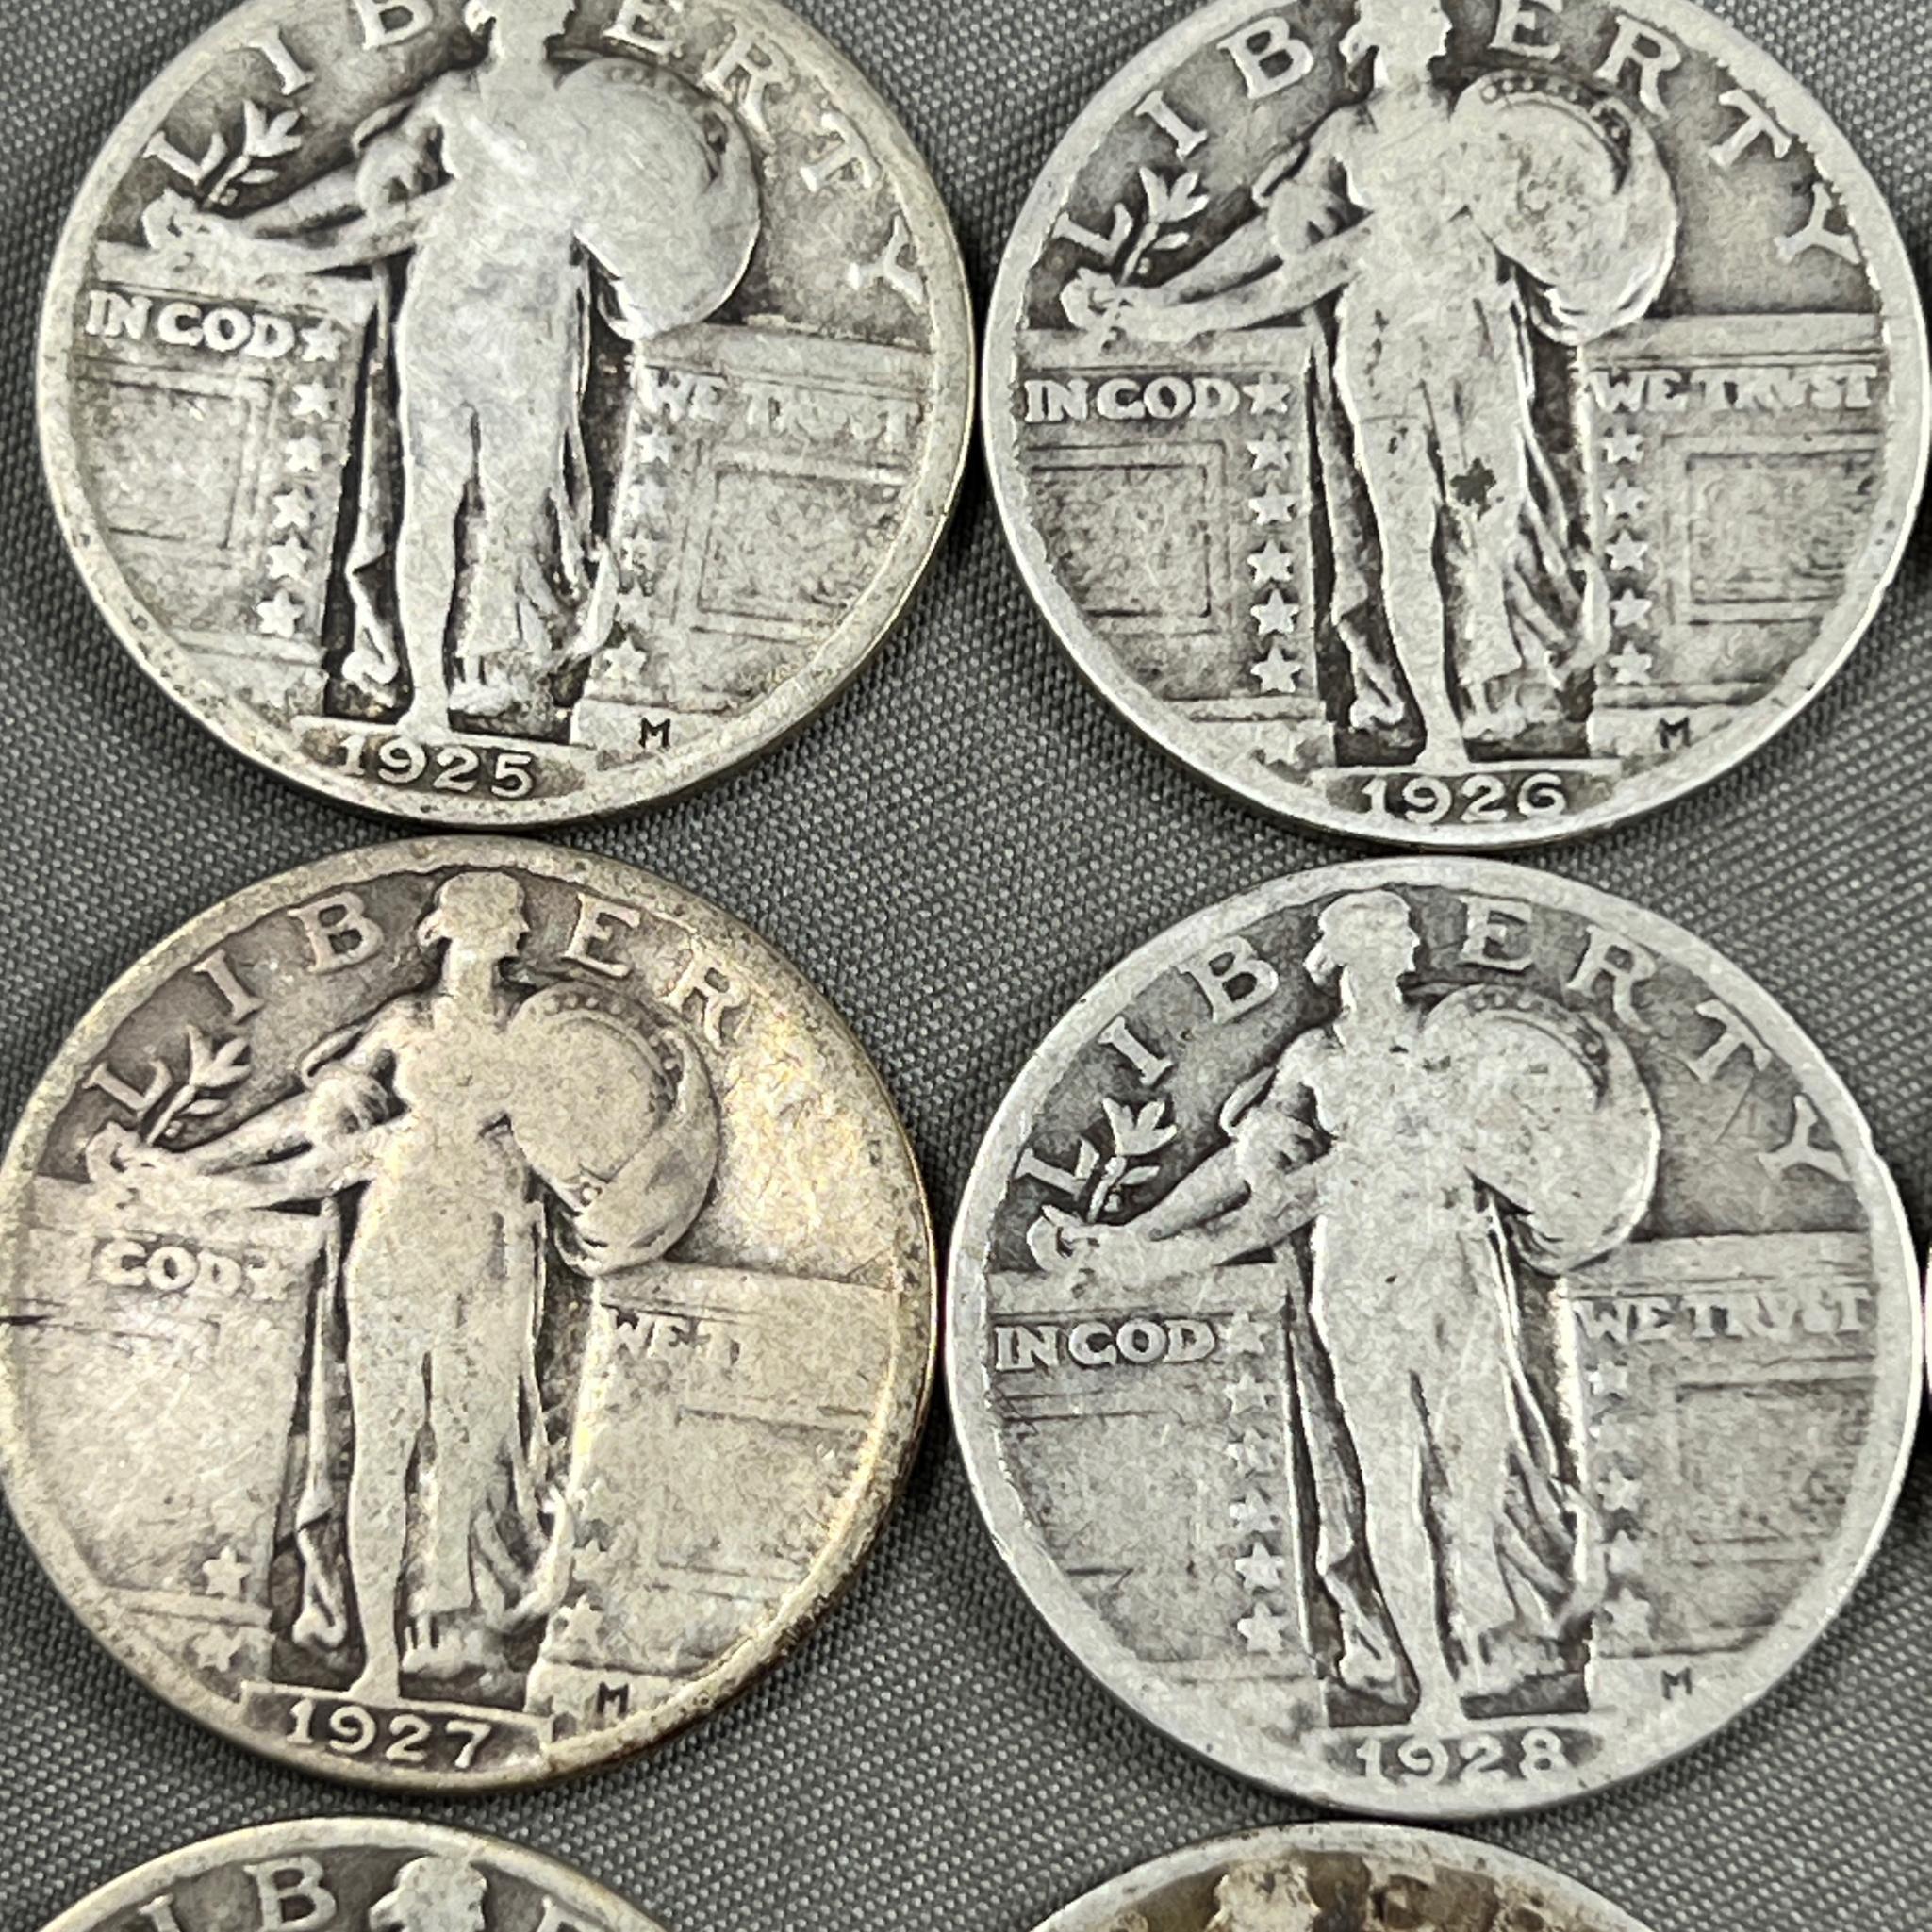 COLLECTION STARTER of 9- Standing Liberty Quarters, 1925, 26, 26S, 27, 28, 28S, 29, 30 and 1930S